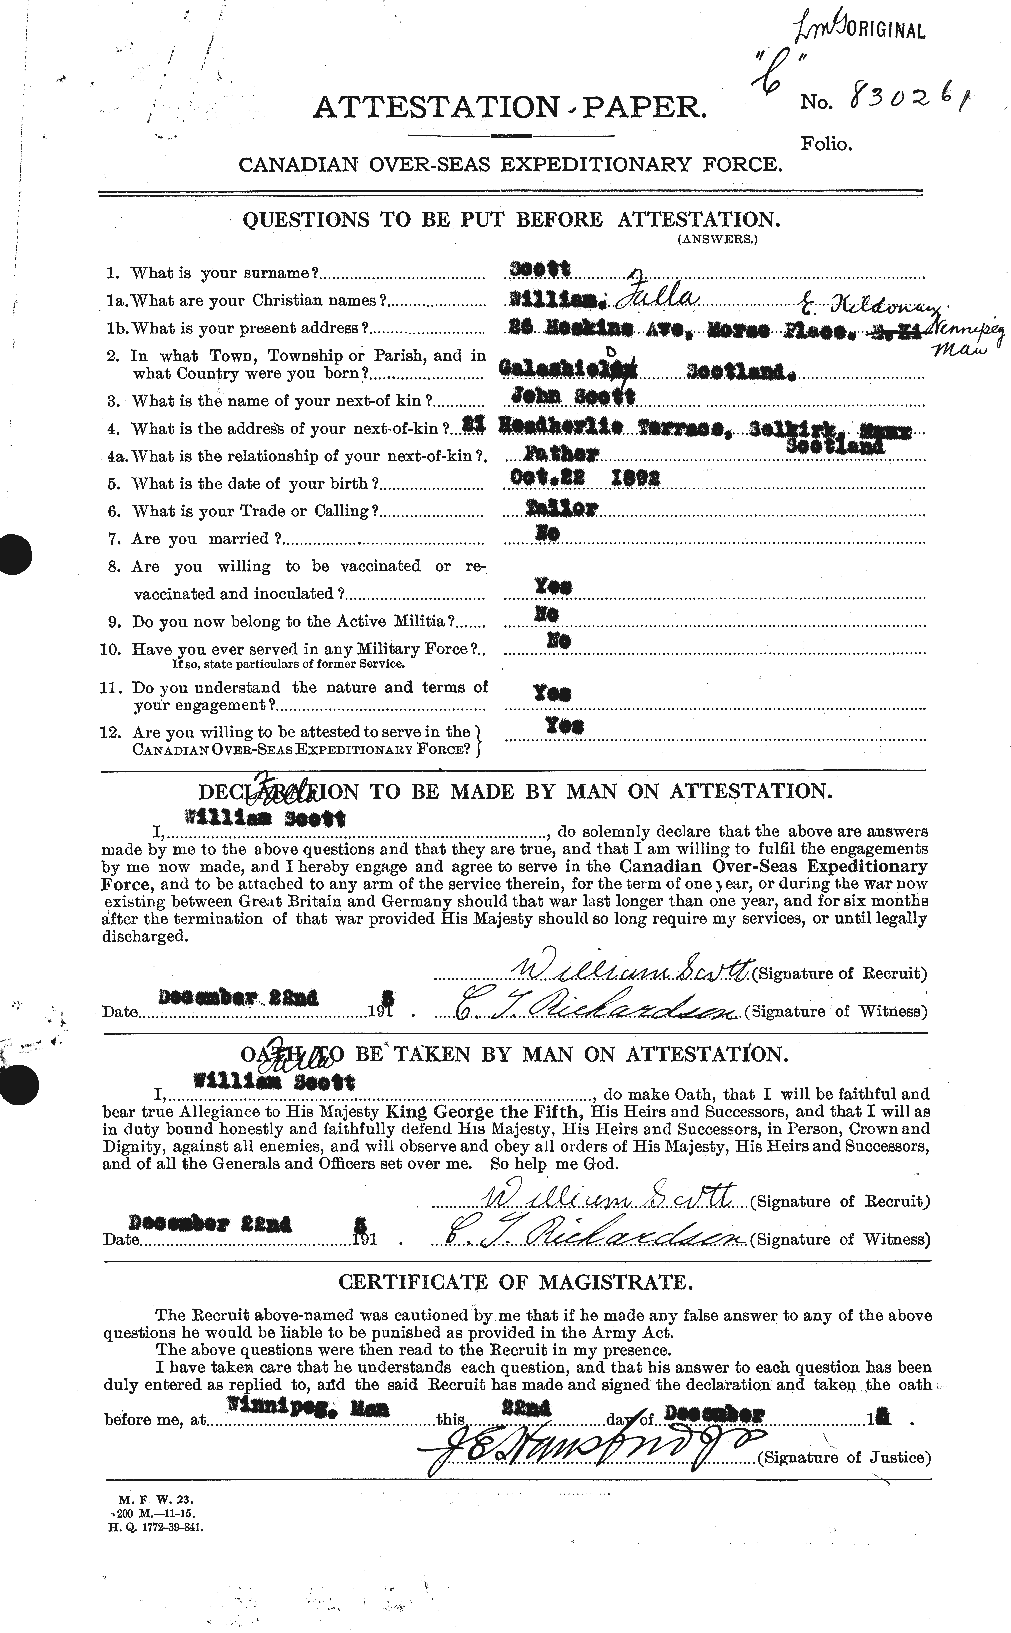 Personnel Records of the First World War - CEF 087024a